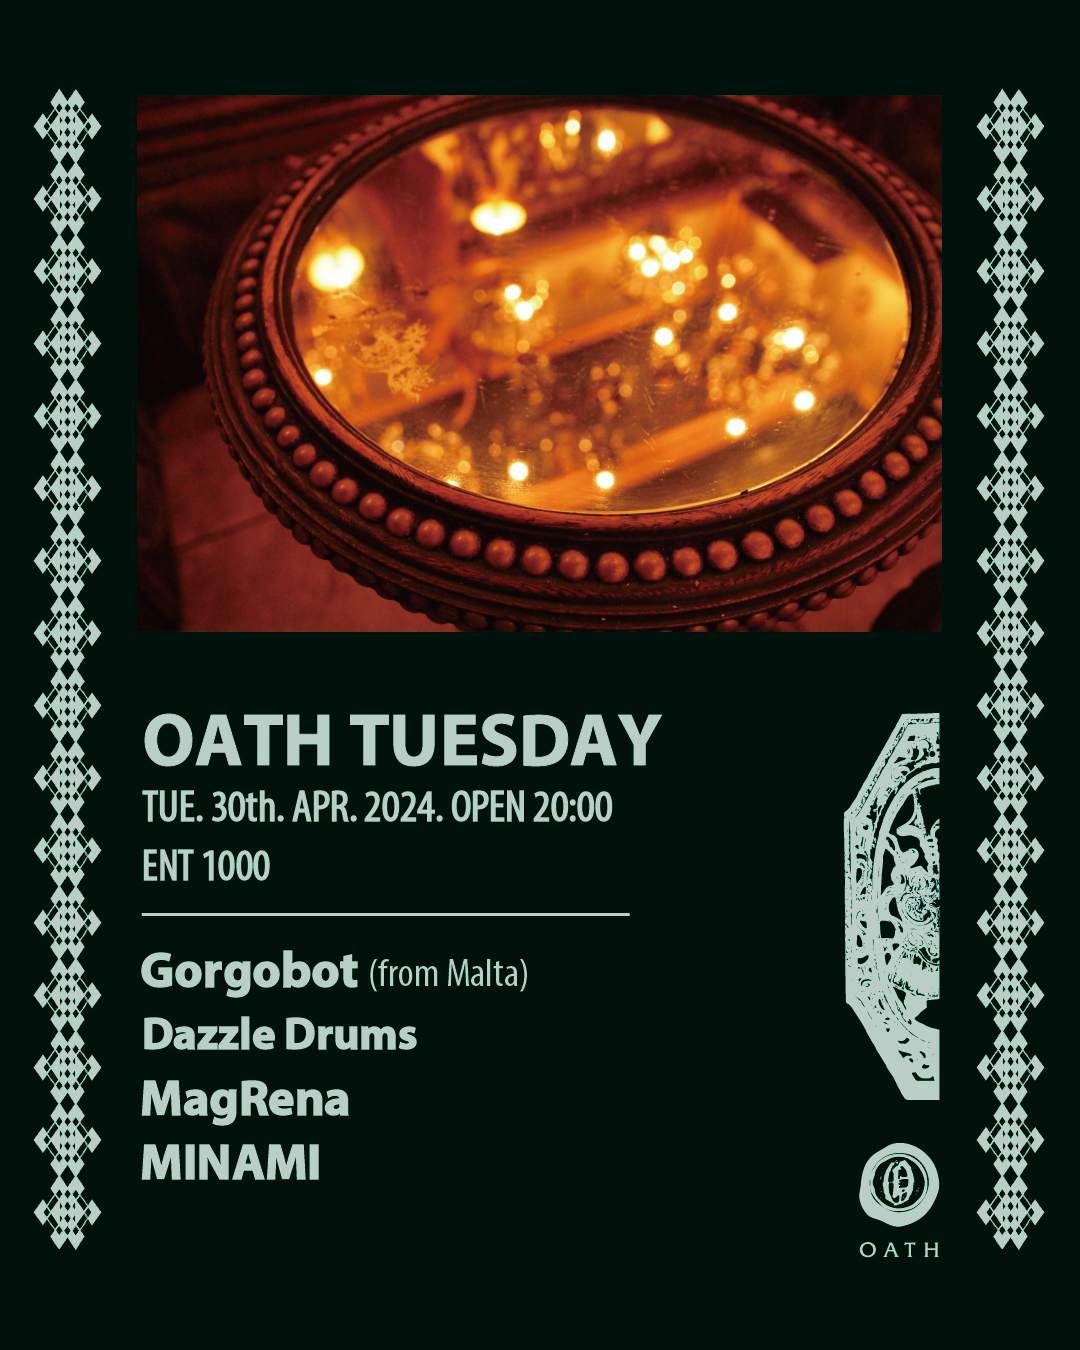 OATH TUESDAY - フライヤー表